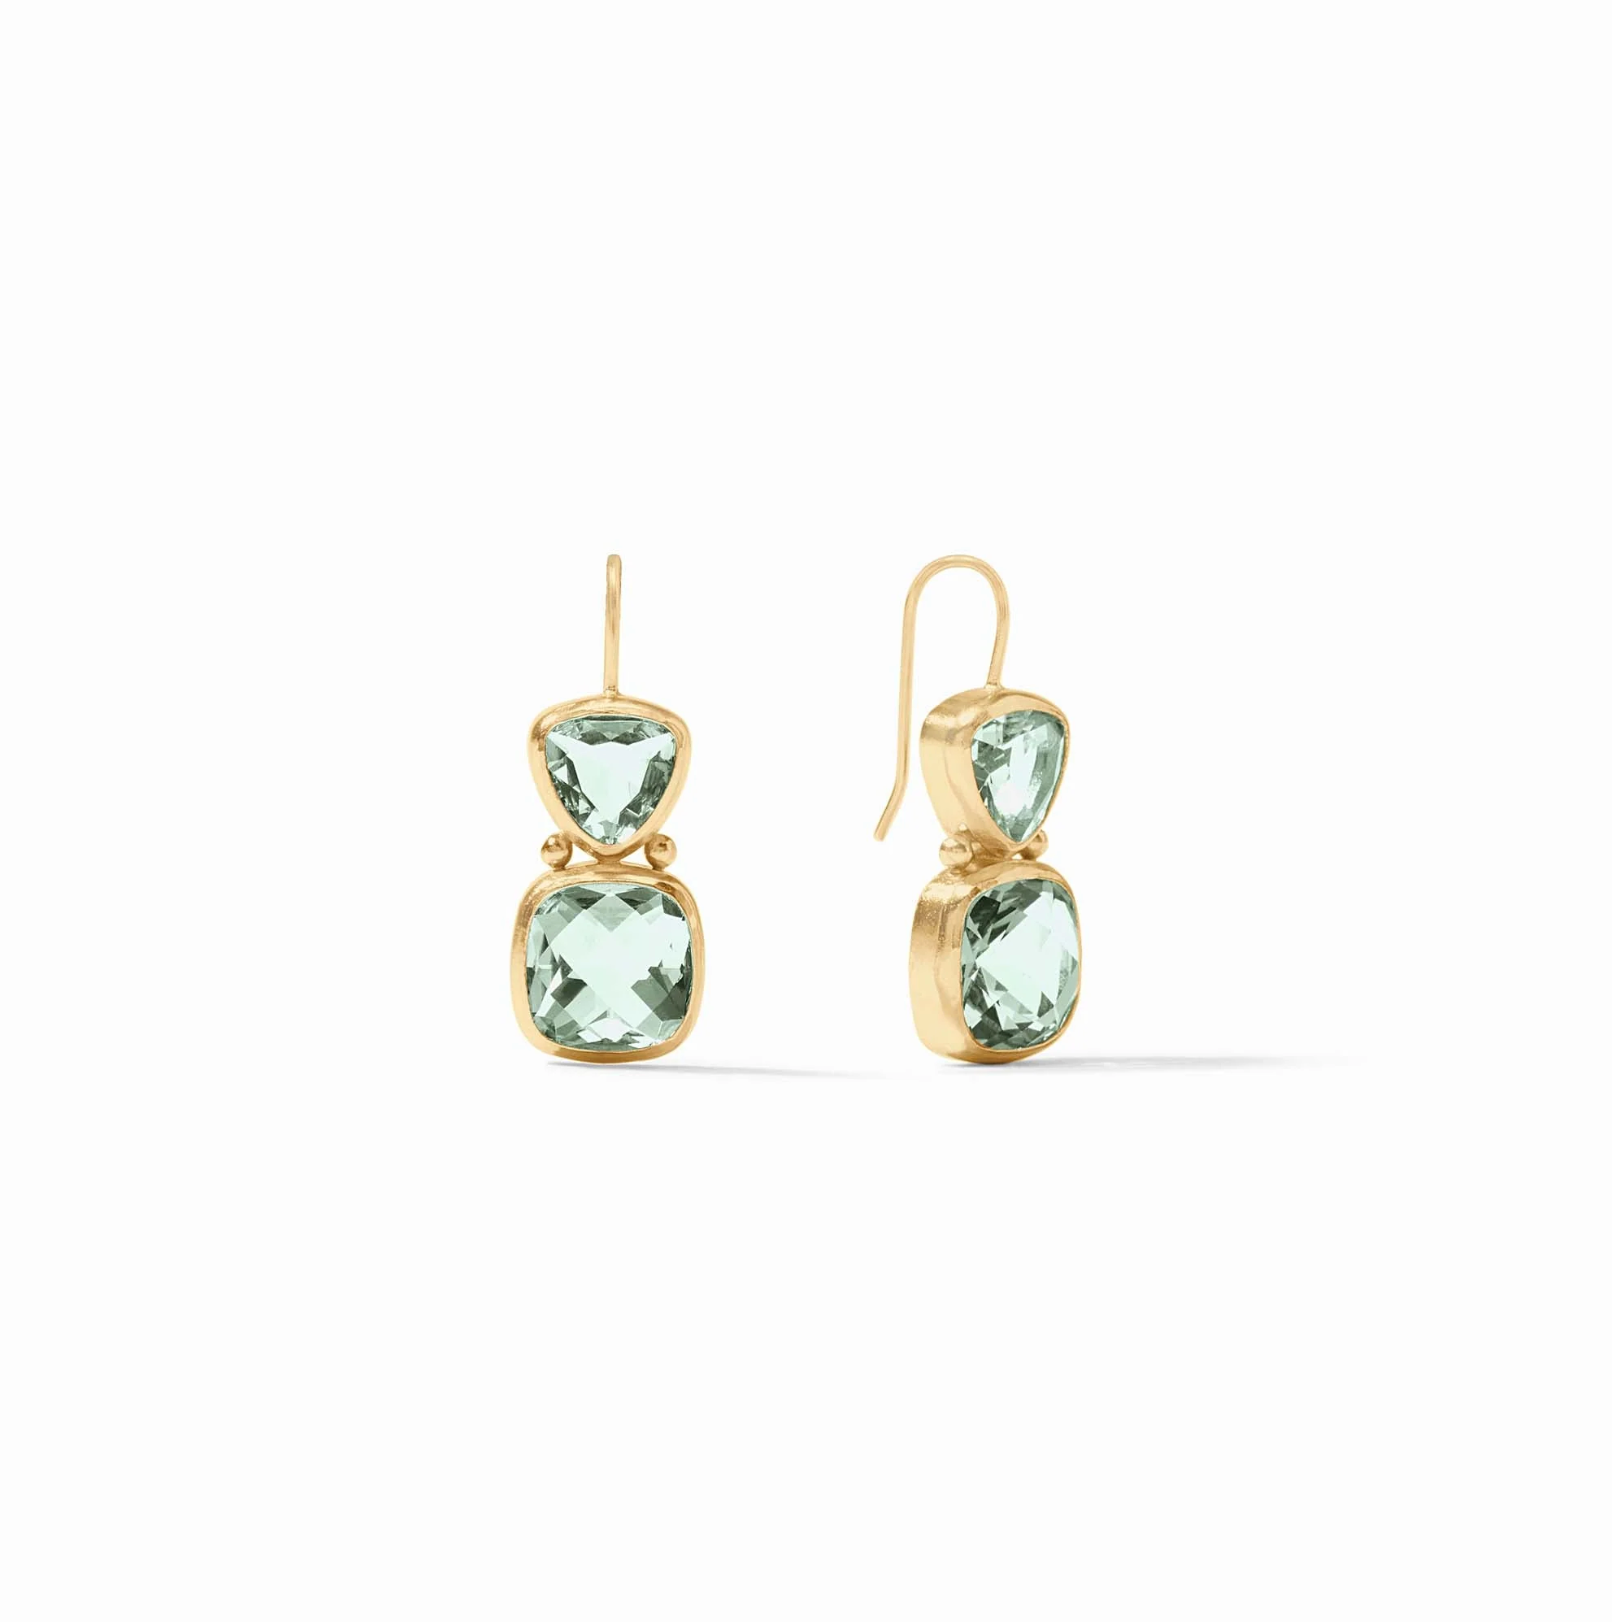 Aquitaine Earring in Aquamarine Blue - The French Shoppe